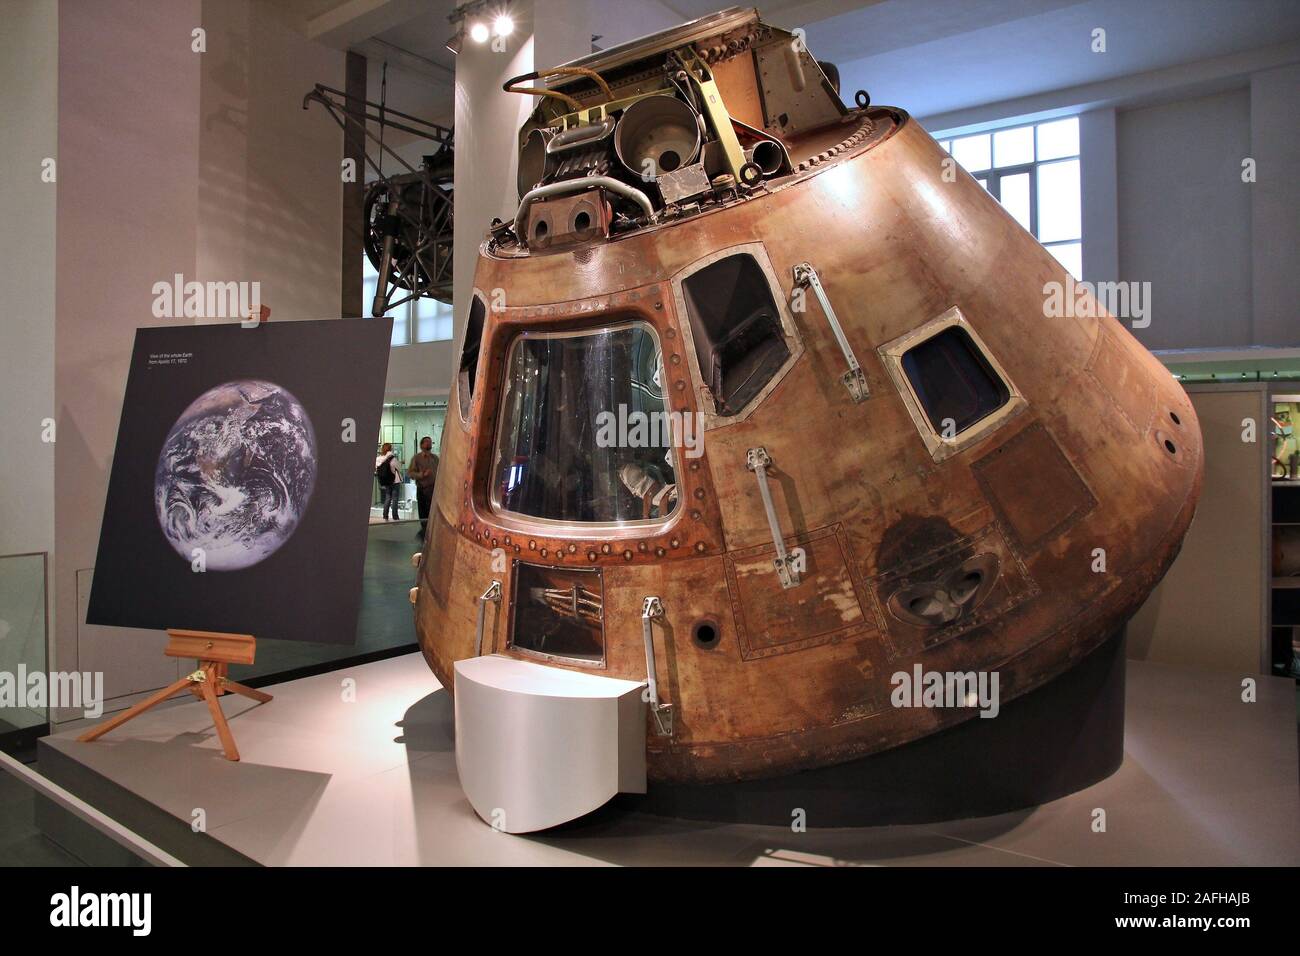 LONDON, UK - MAY 14, 2012: Visitors admire Apollo 10 space capsule at Science Museum in London. With almost 2.8 million annual visitors it is the 5th Stock Photo